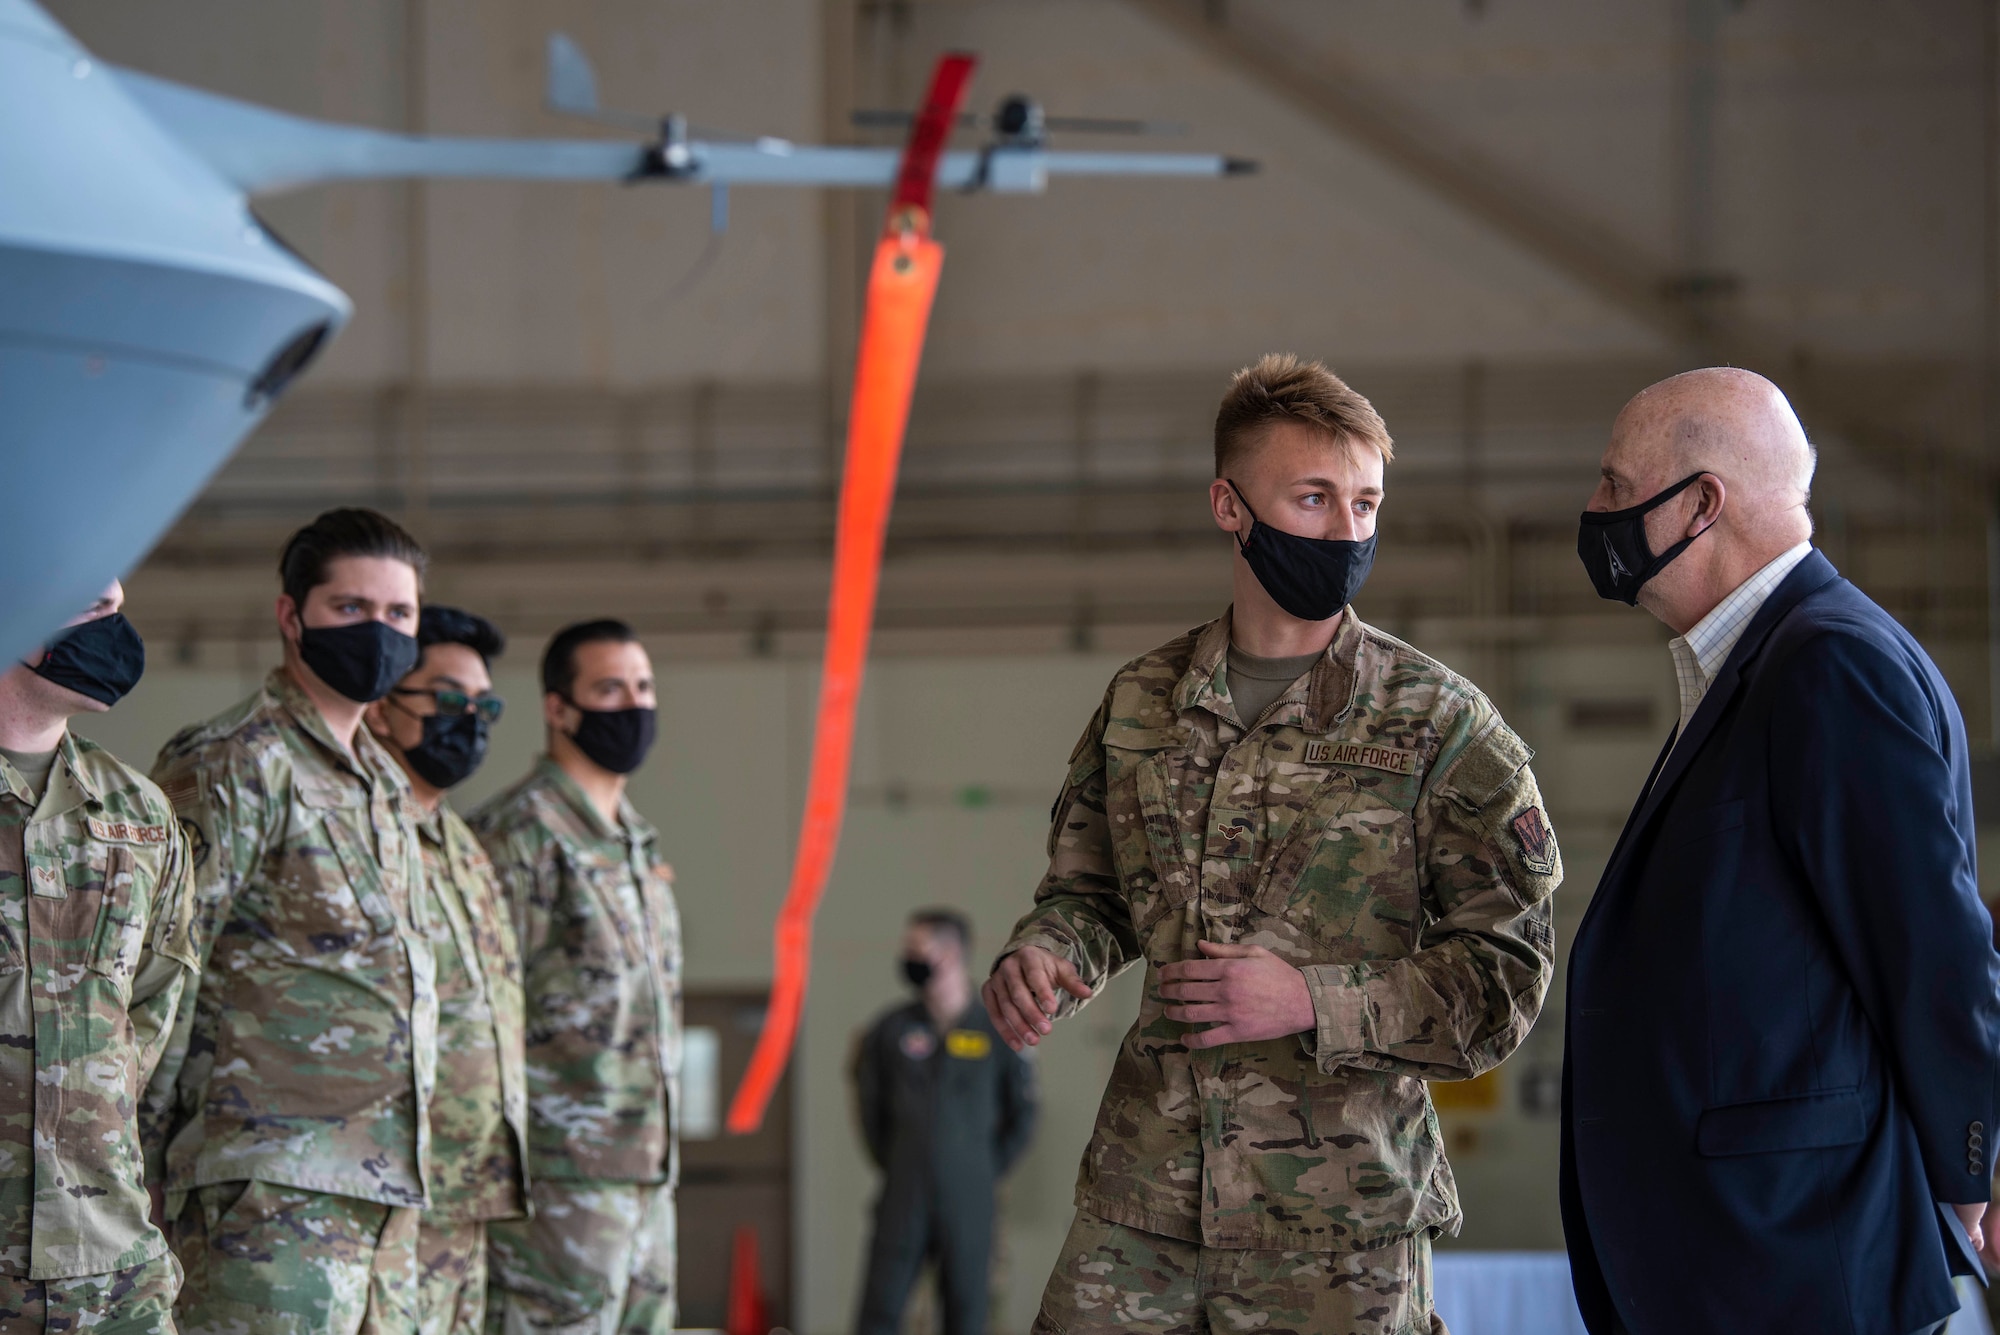 Acting Secretary of the Air Force John Roth, is briefed by a 432nd Maintenance Group Airman on the capabilities of the MQ-9 Reaper before meeting superior performers at Creech Air Force Base, Nev., March 25, 2021. Roth recognized Airmen from across the Wing, who are a testament to the array of specialties and talents needed to keep the U.S. ahead of the enemy. (U.S. Air Force photo by Senior Airman Haley Stevens)